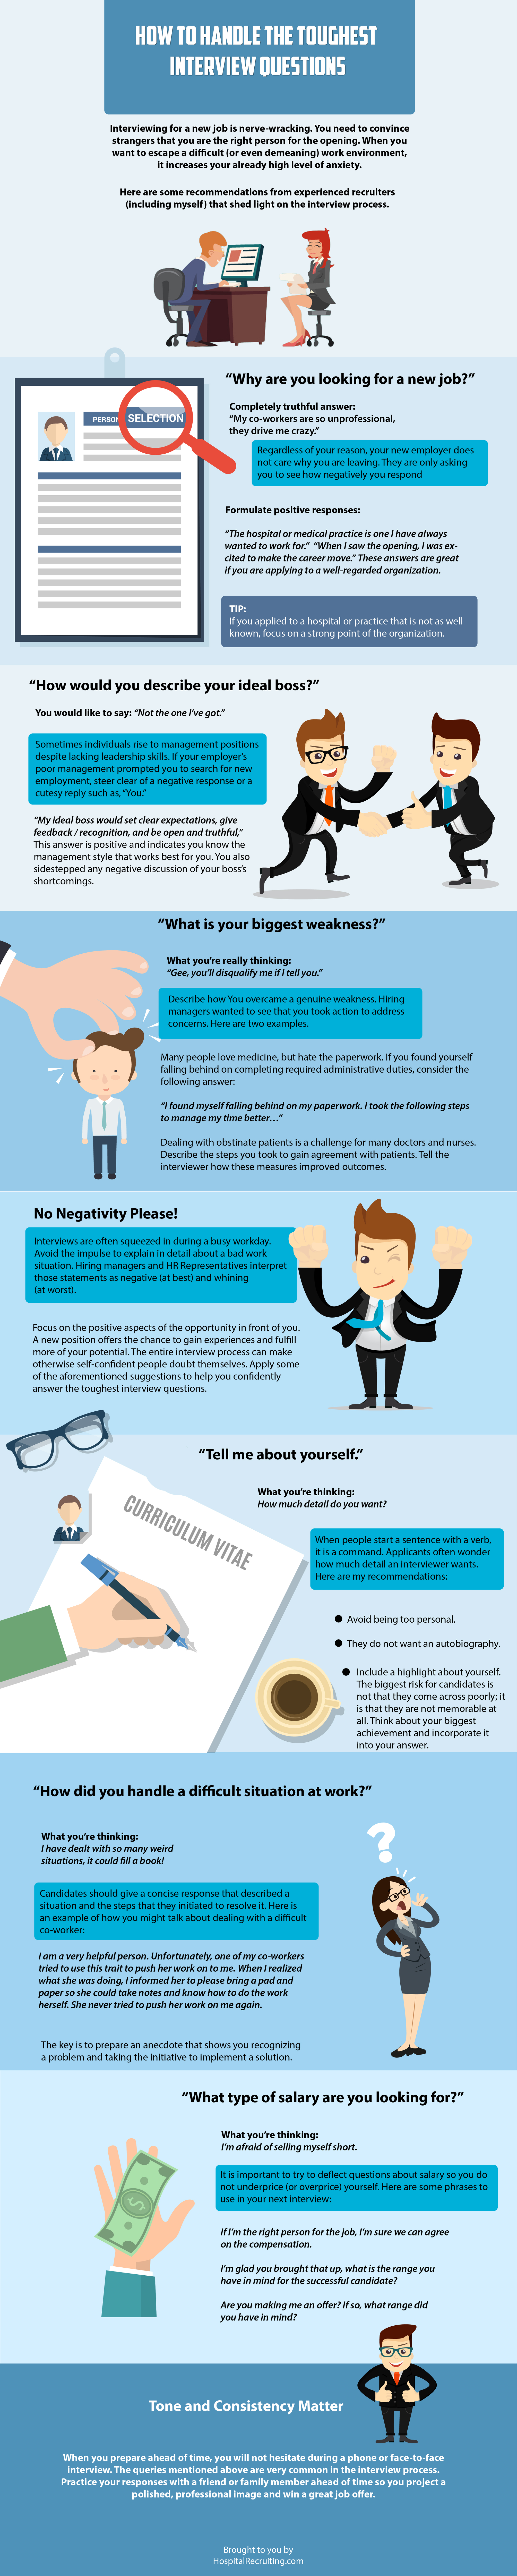 [Infographic] How to Handle the Toughest Interview Questions